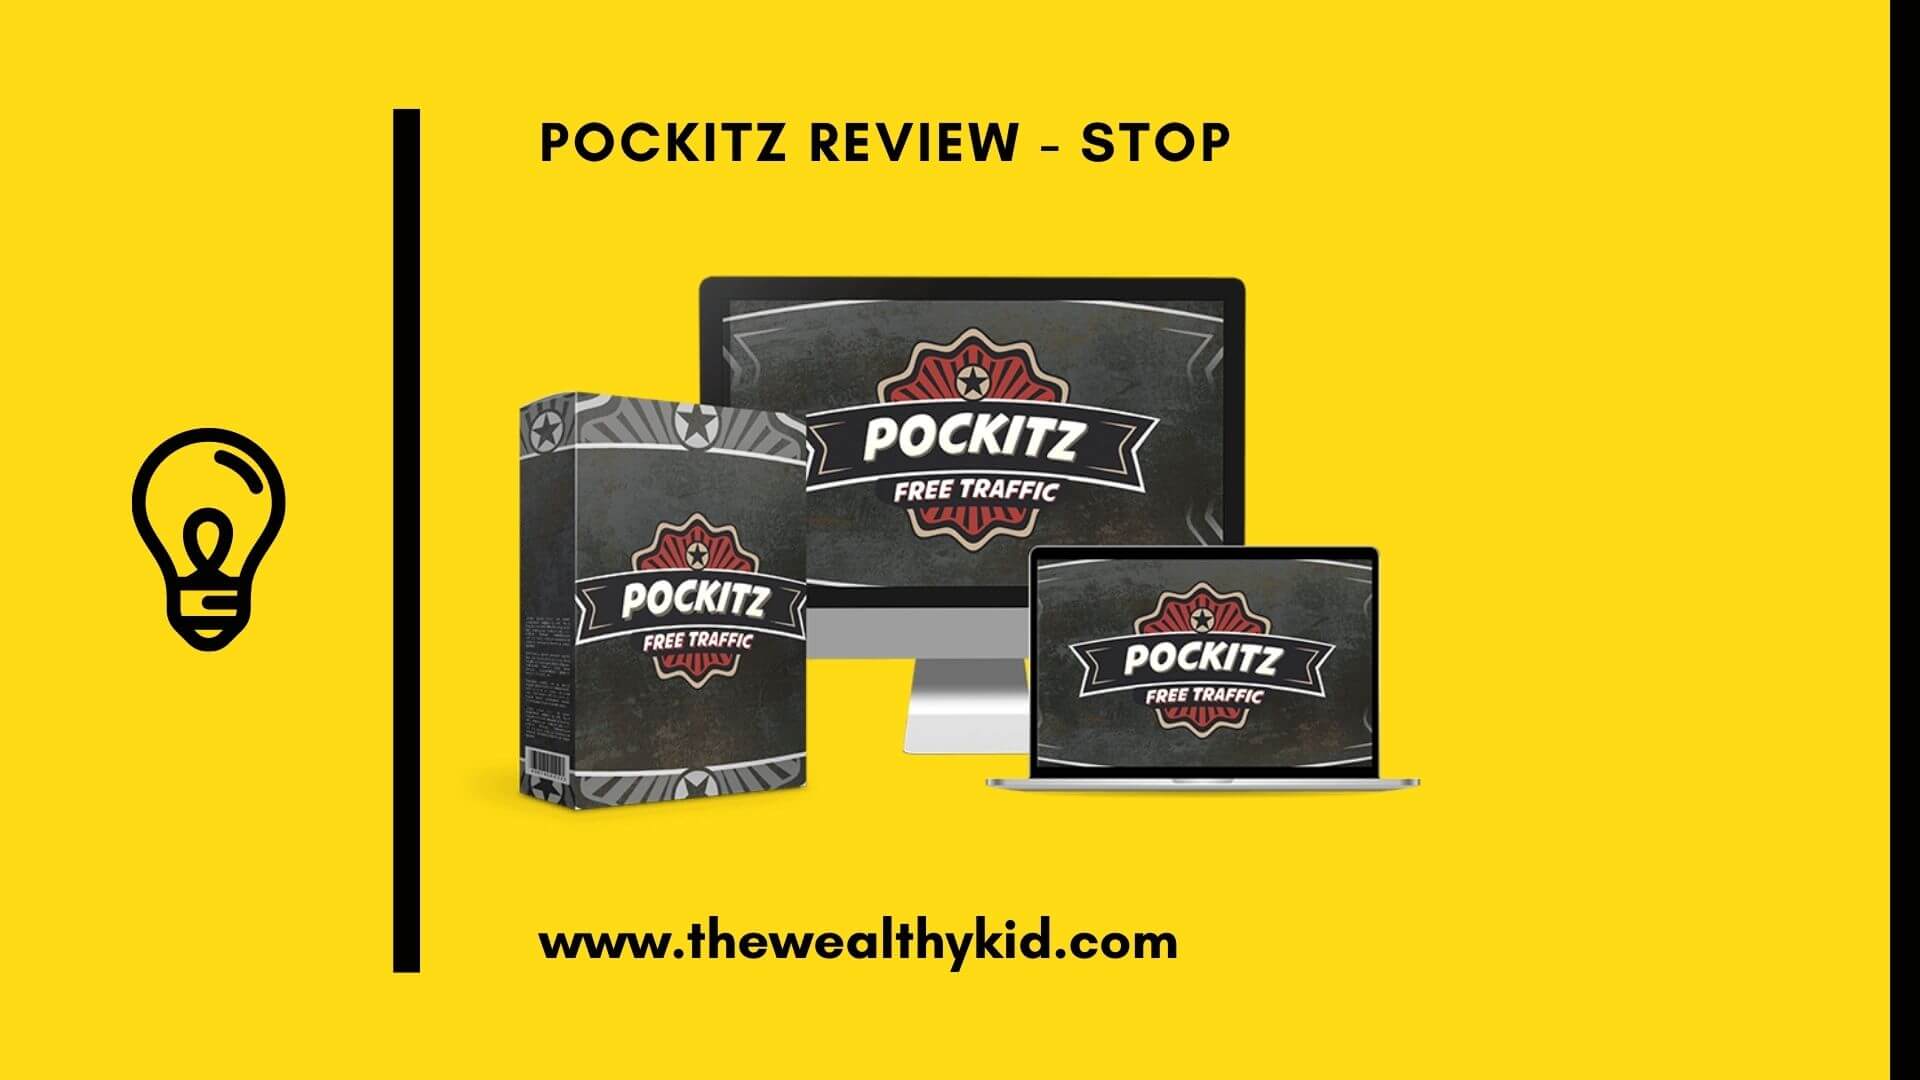 Pockitz Reviews - Featured Image